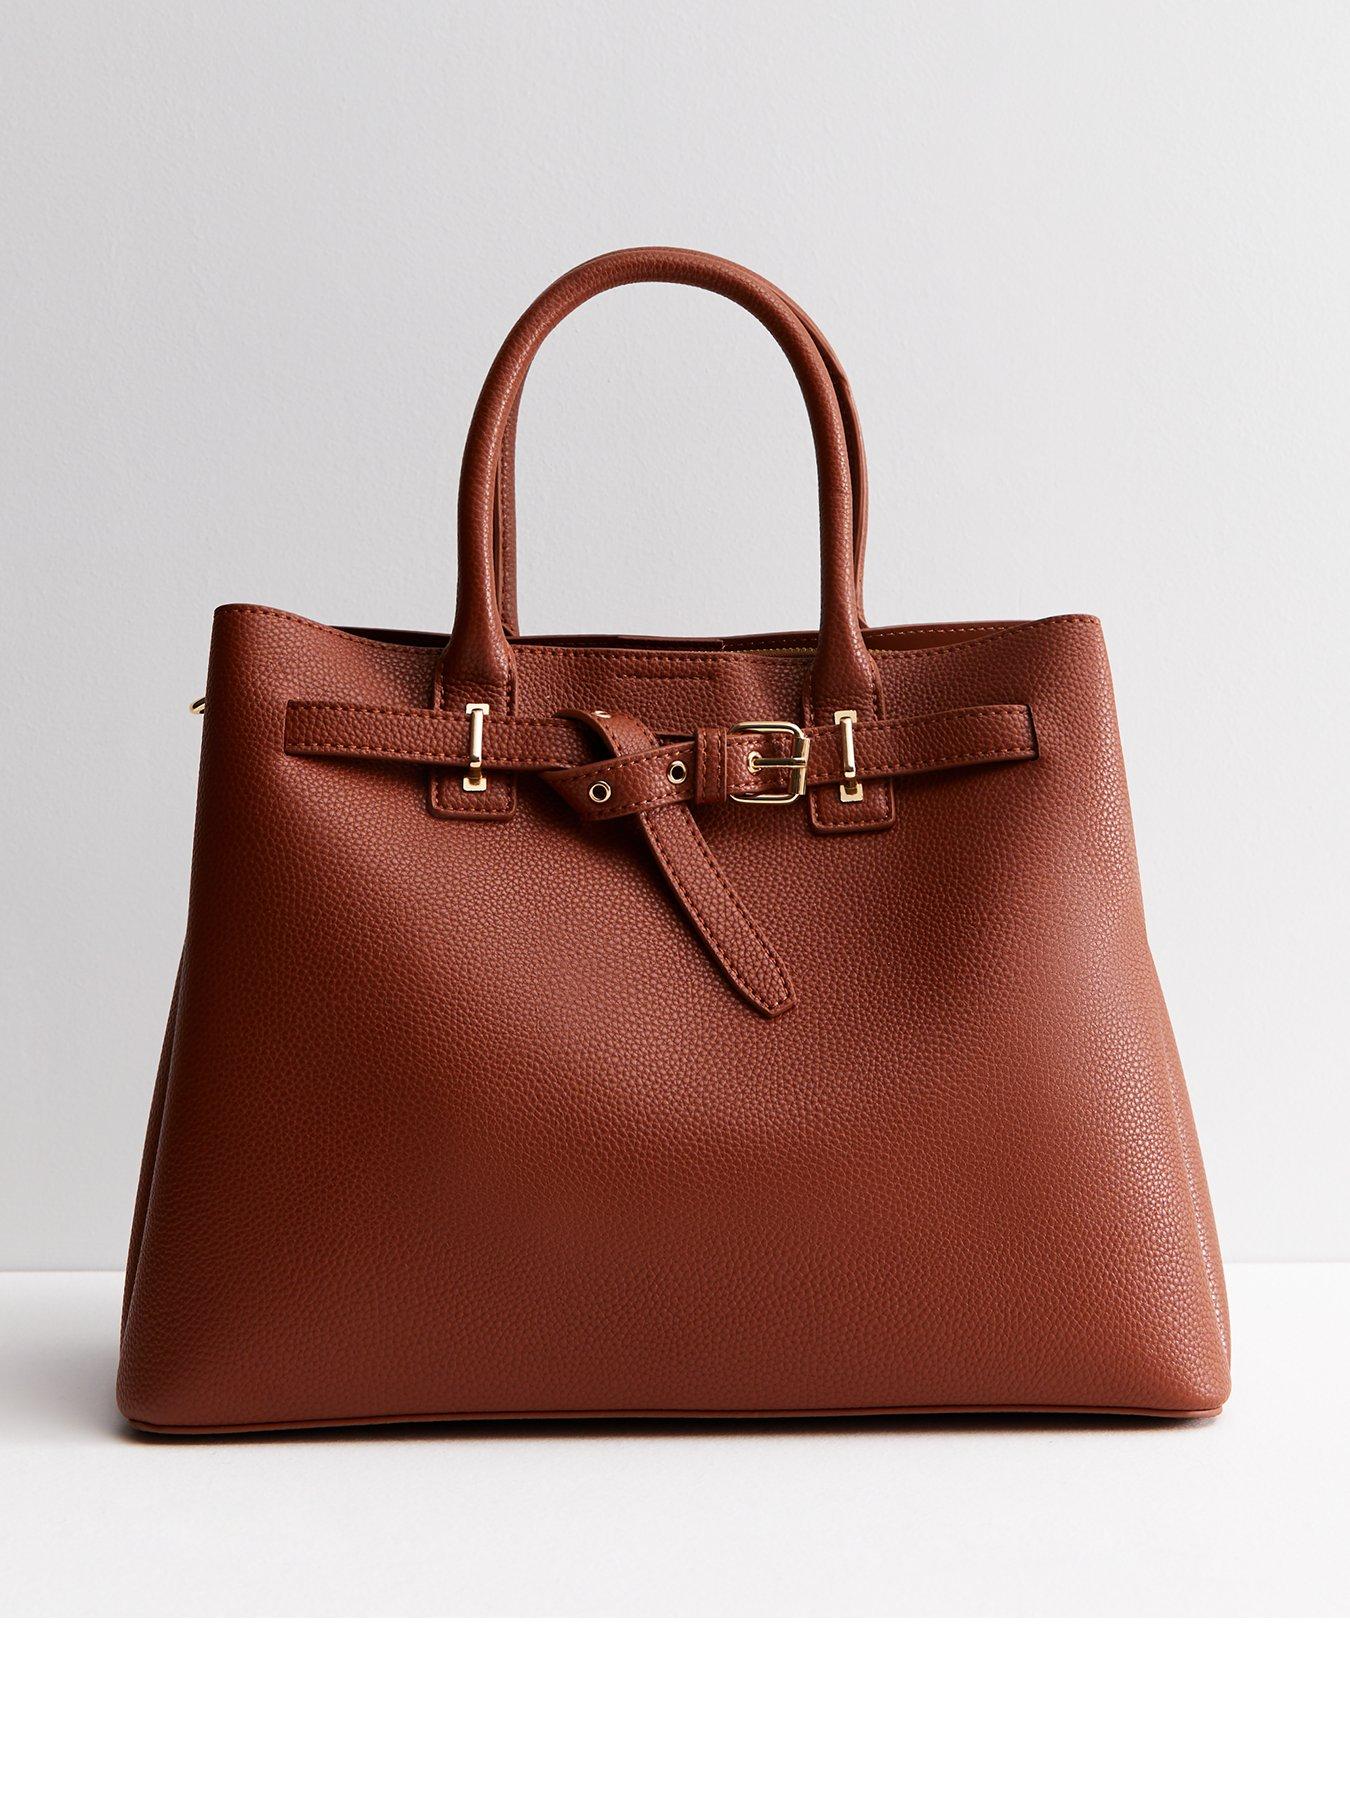 New Look Tan Leather-Look Buckle Tote Bag | littlewoods.com